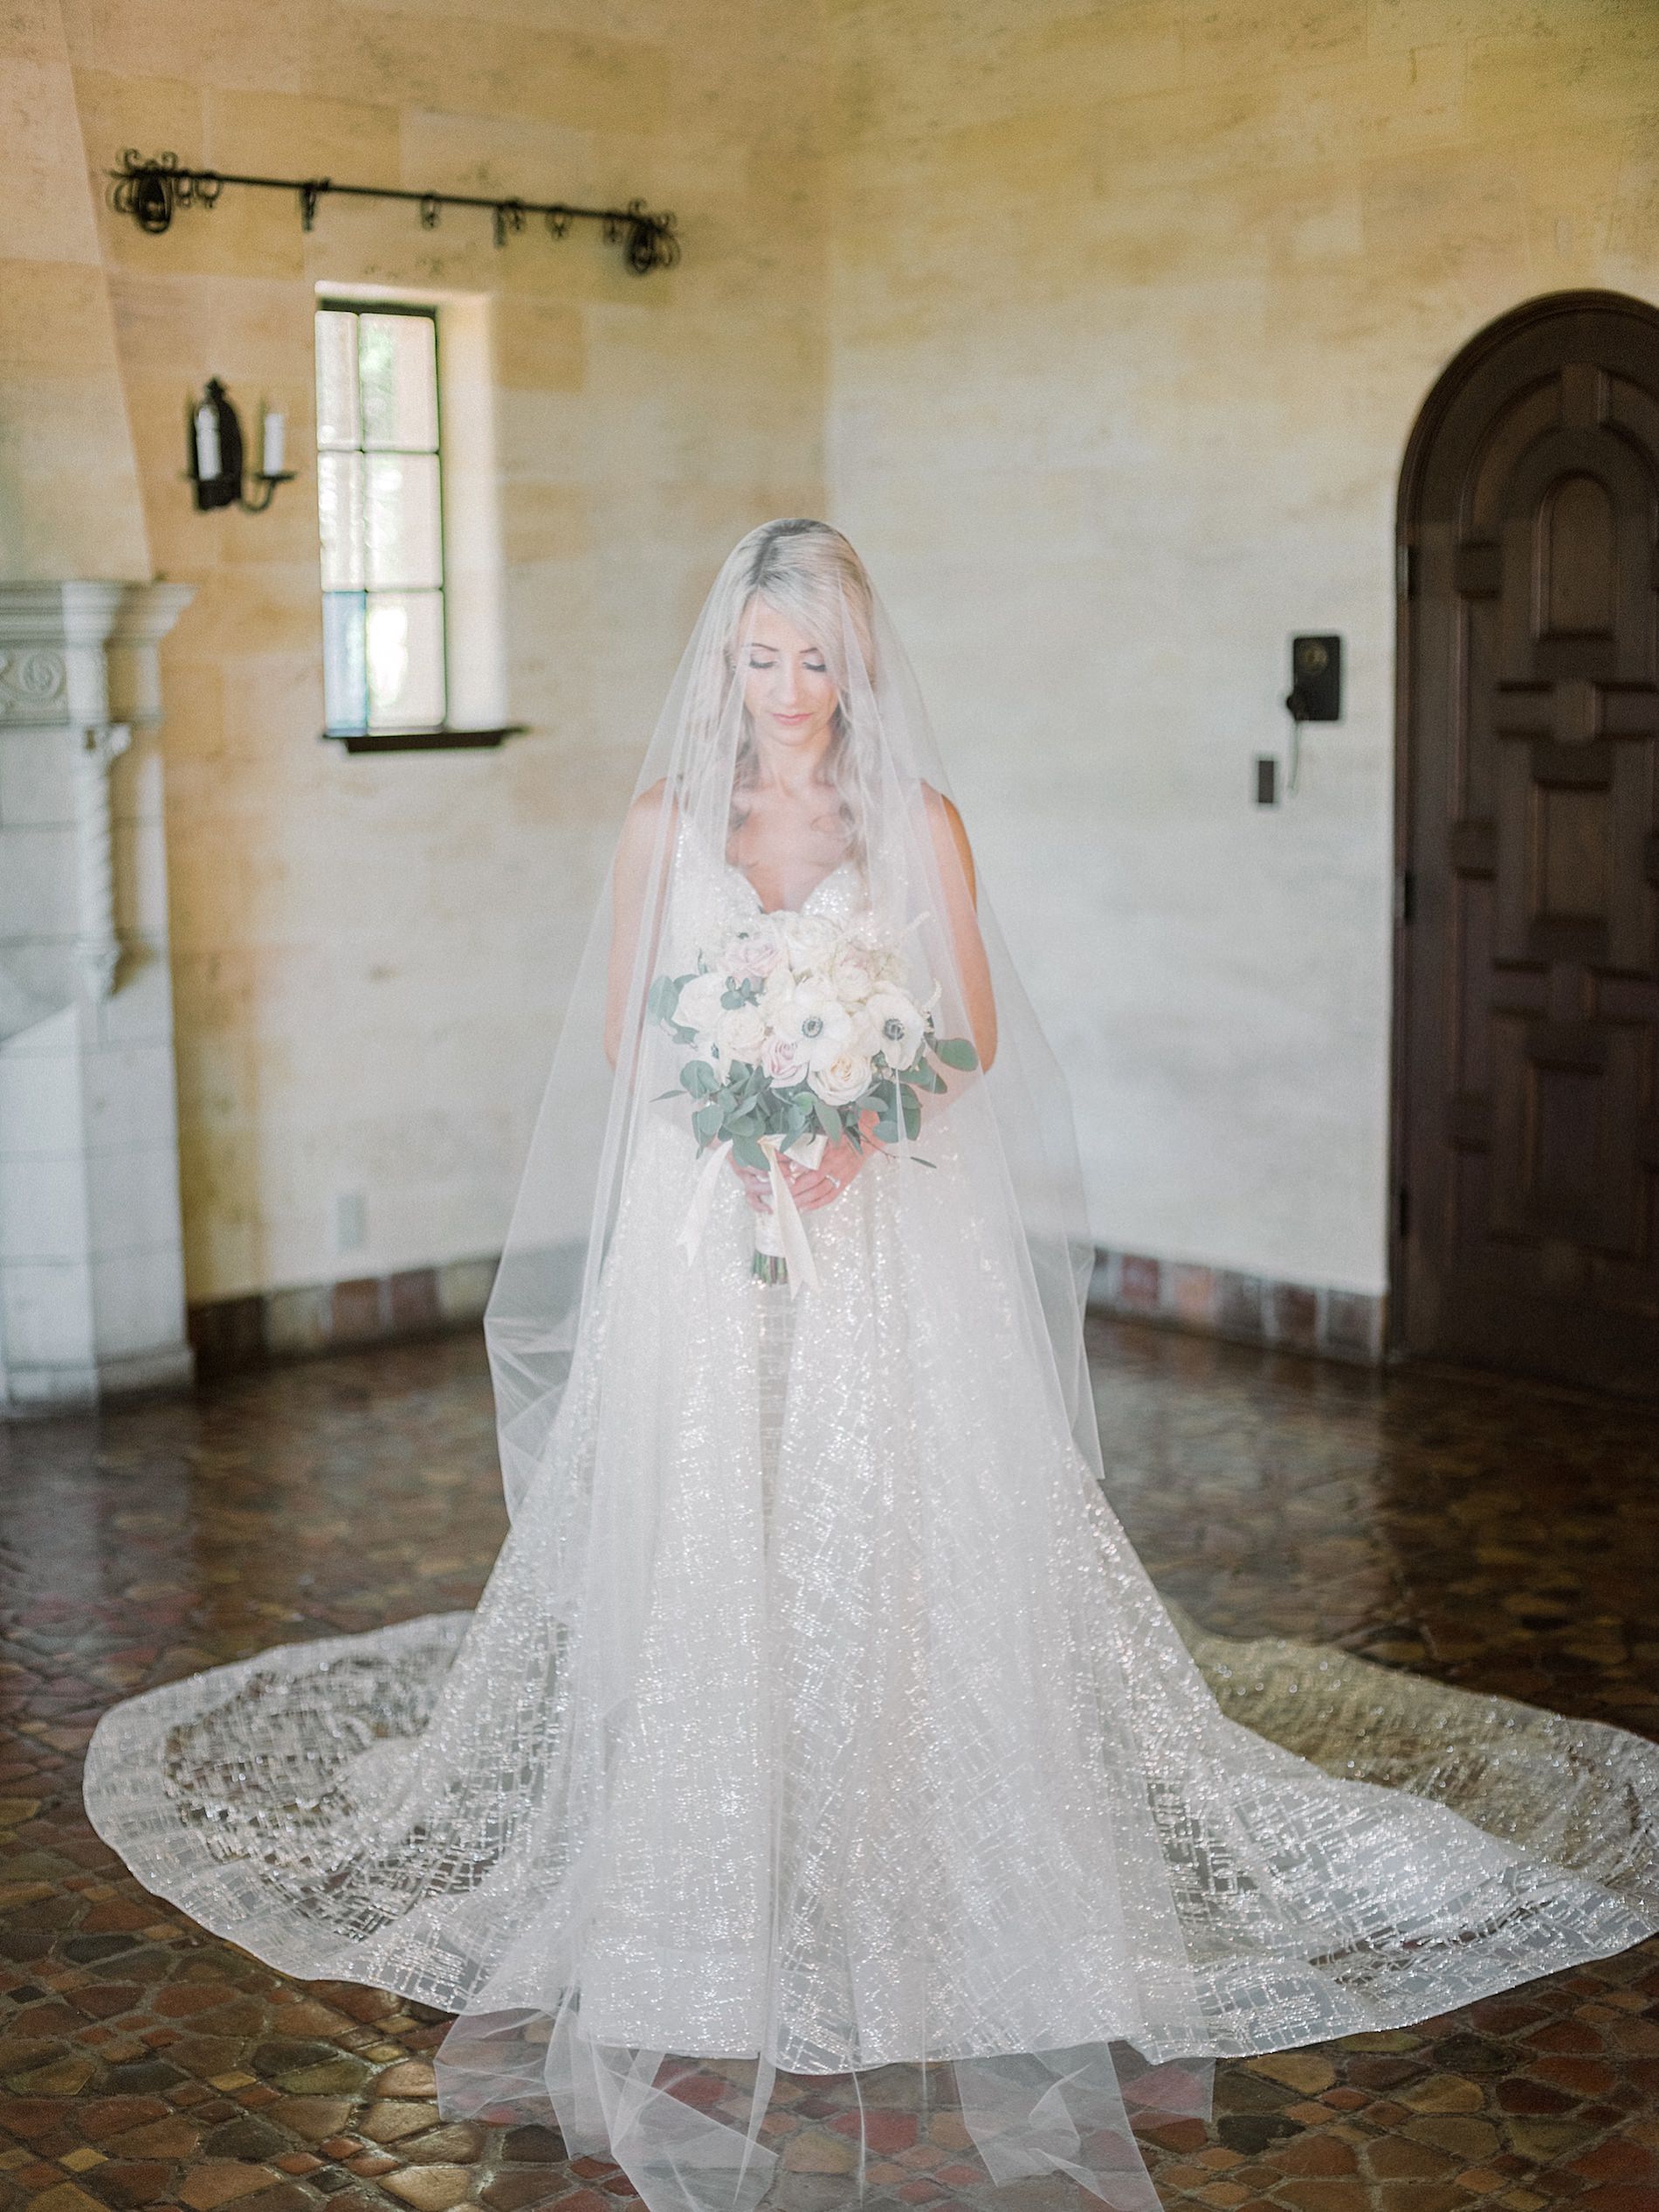 Romantic Sarasota Bride in Lazaro V-Neck Specialty Fabric Ballgown Wedding Dress with Full Length Veil Holding White Anemone and Greenery Floral Bouquet